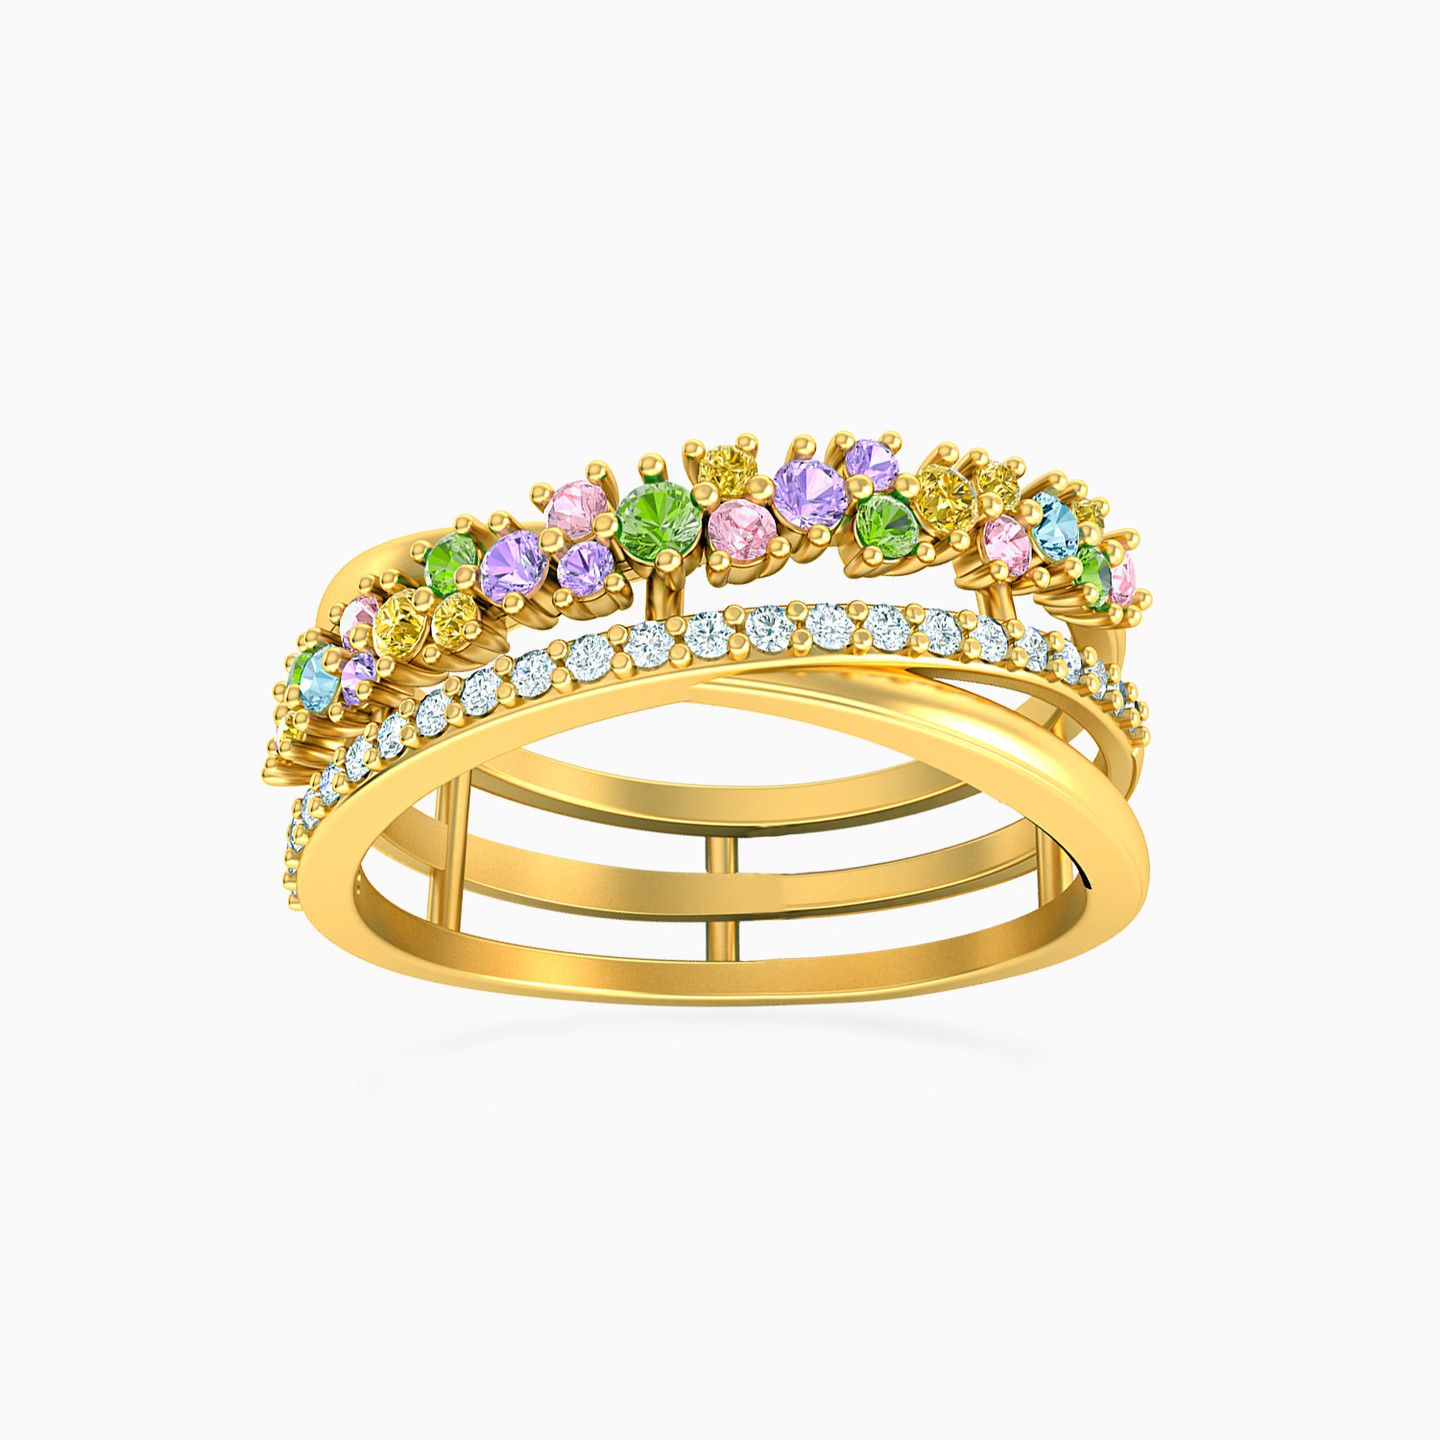 18K Gold Colored Stones Band Ring